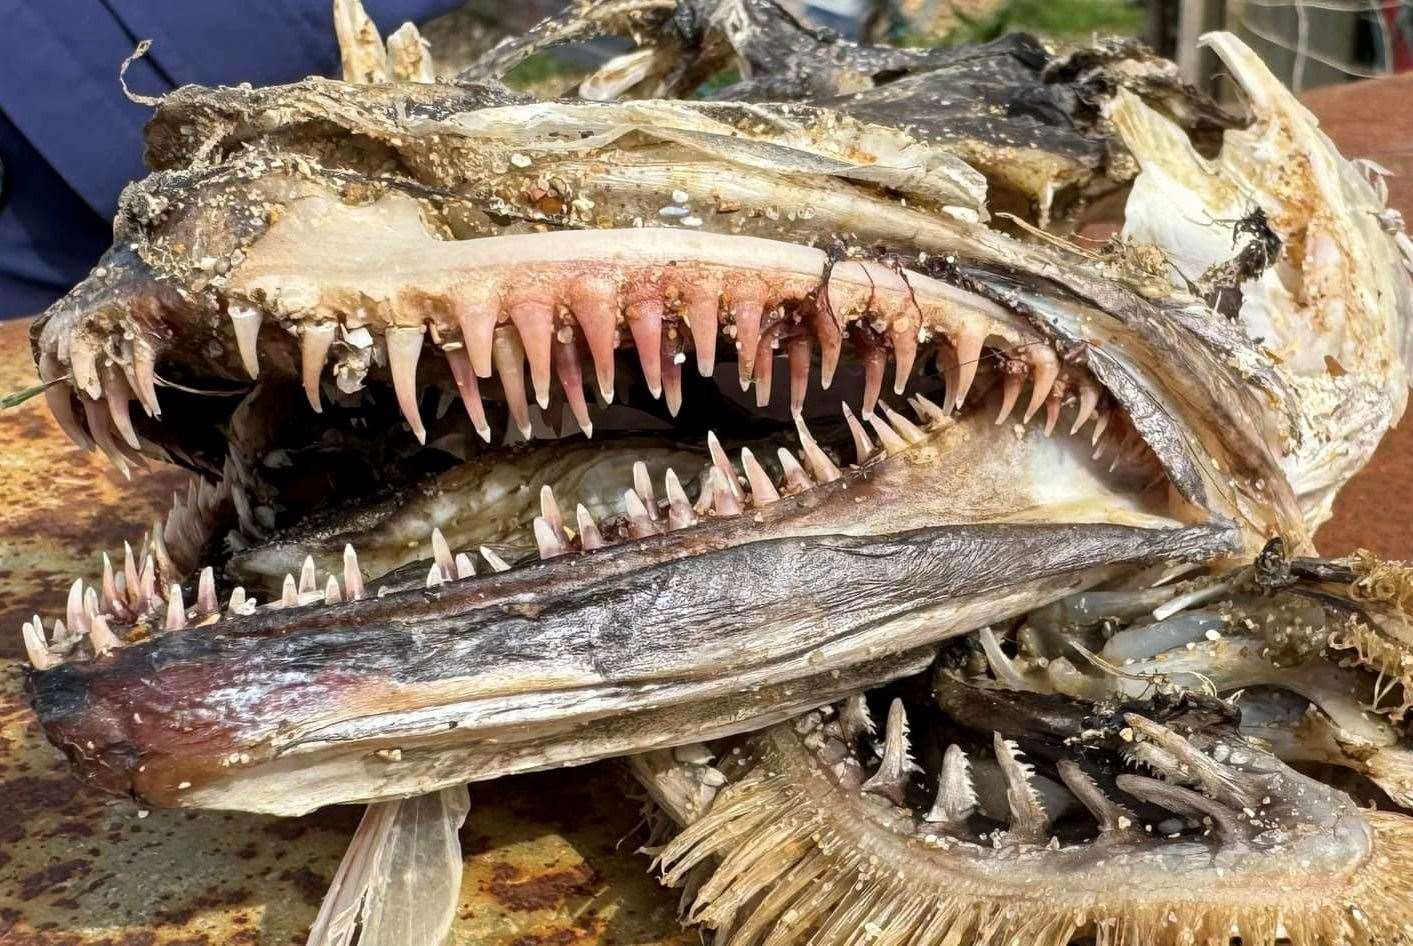 The toothy fish skull found in Whitstable on Friday. Picture: Dave Bartlett